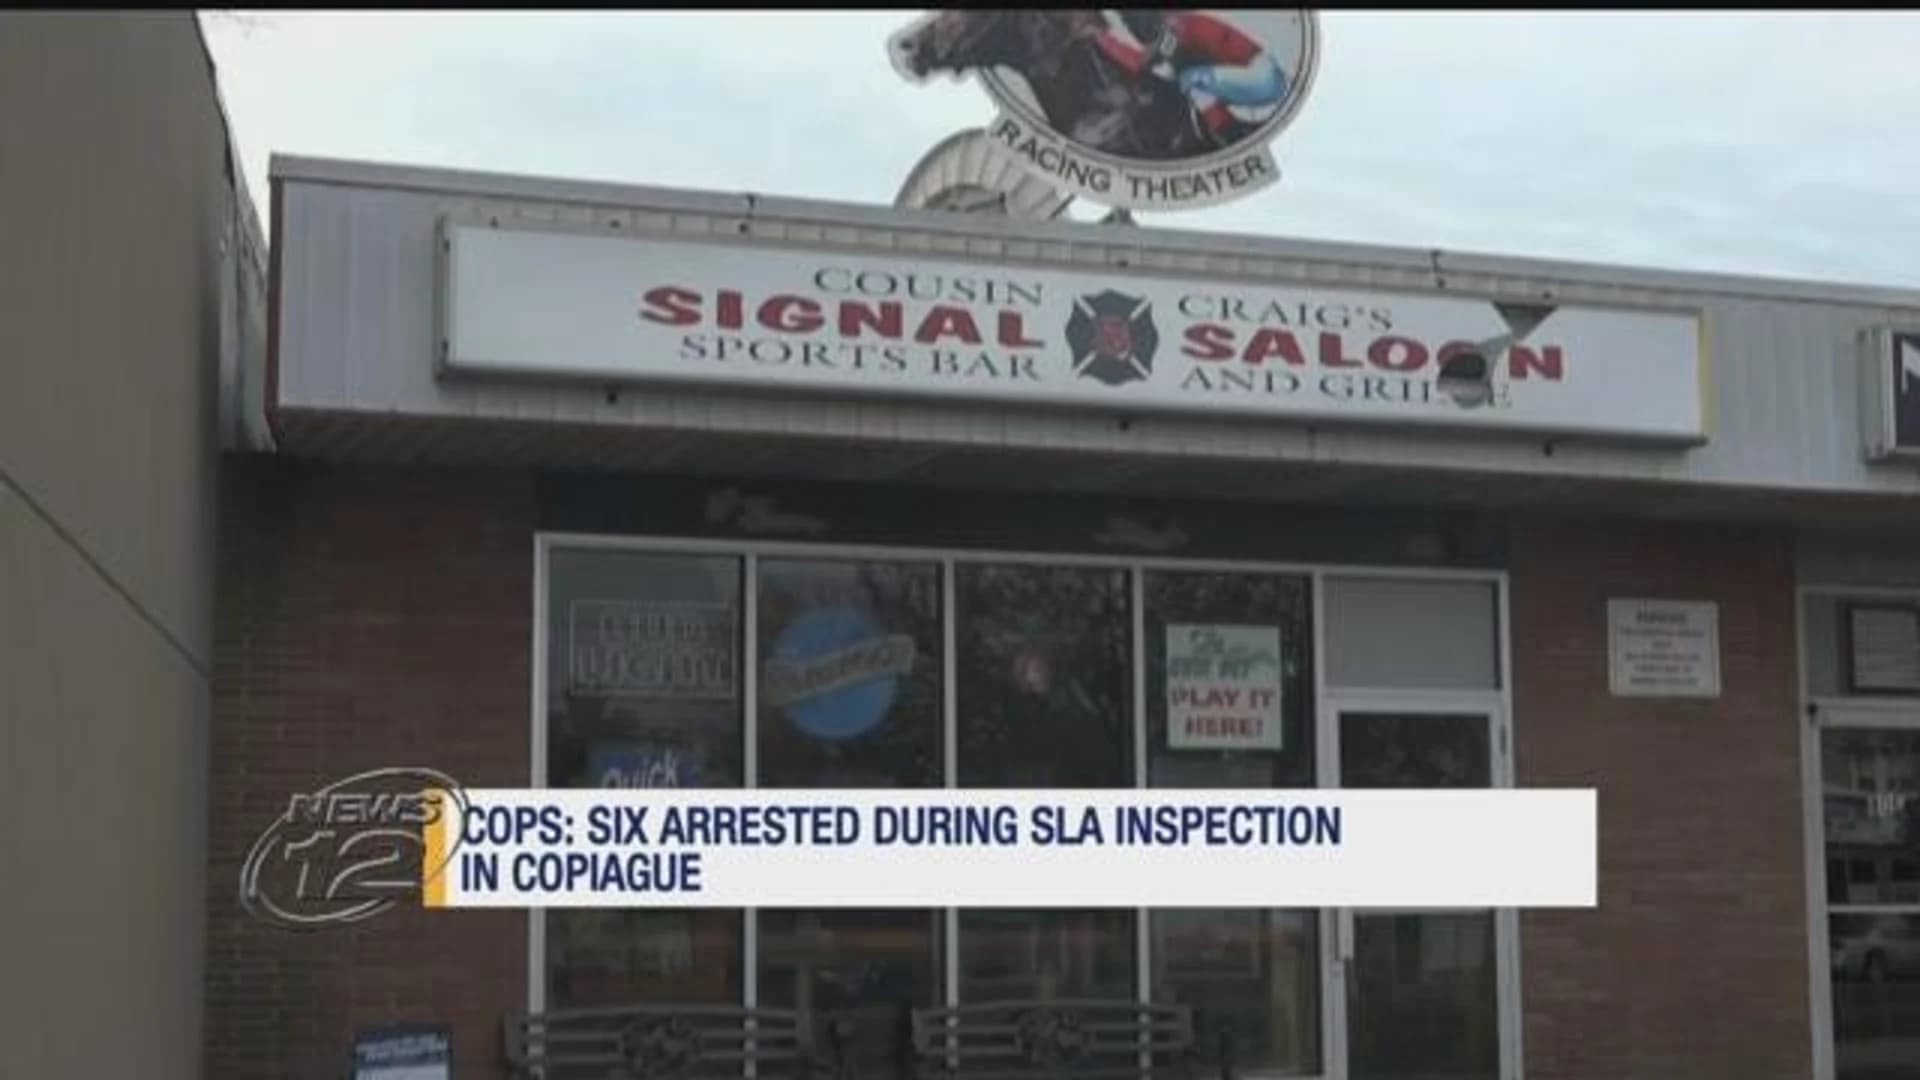 Police: Copiague bar shut down; 6 arrested on various charges